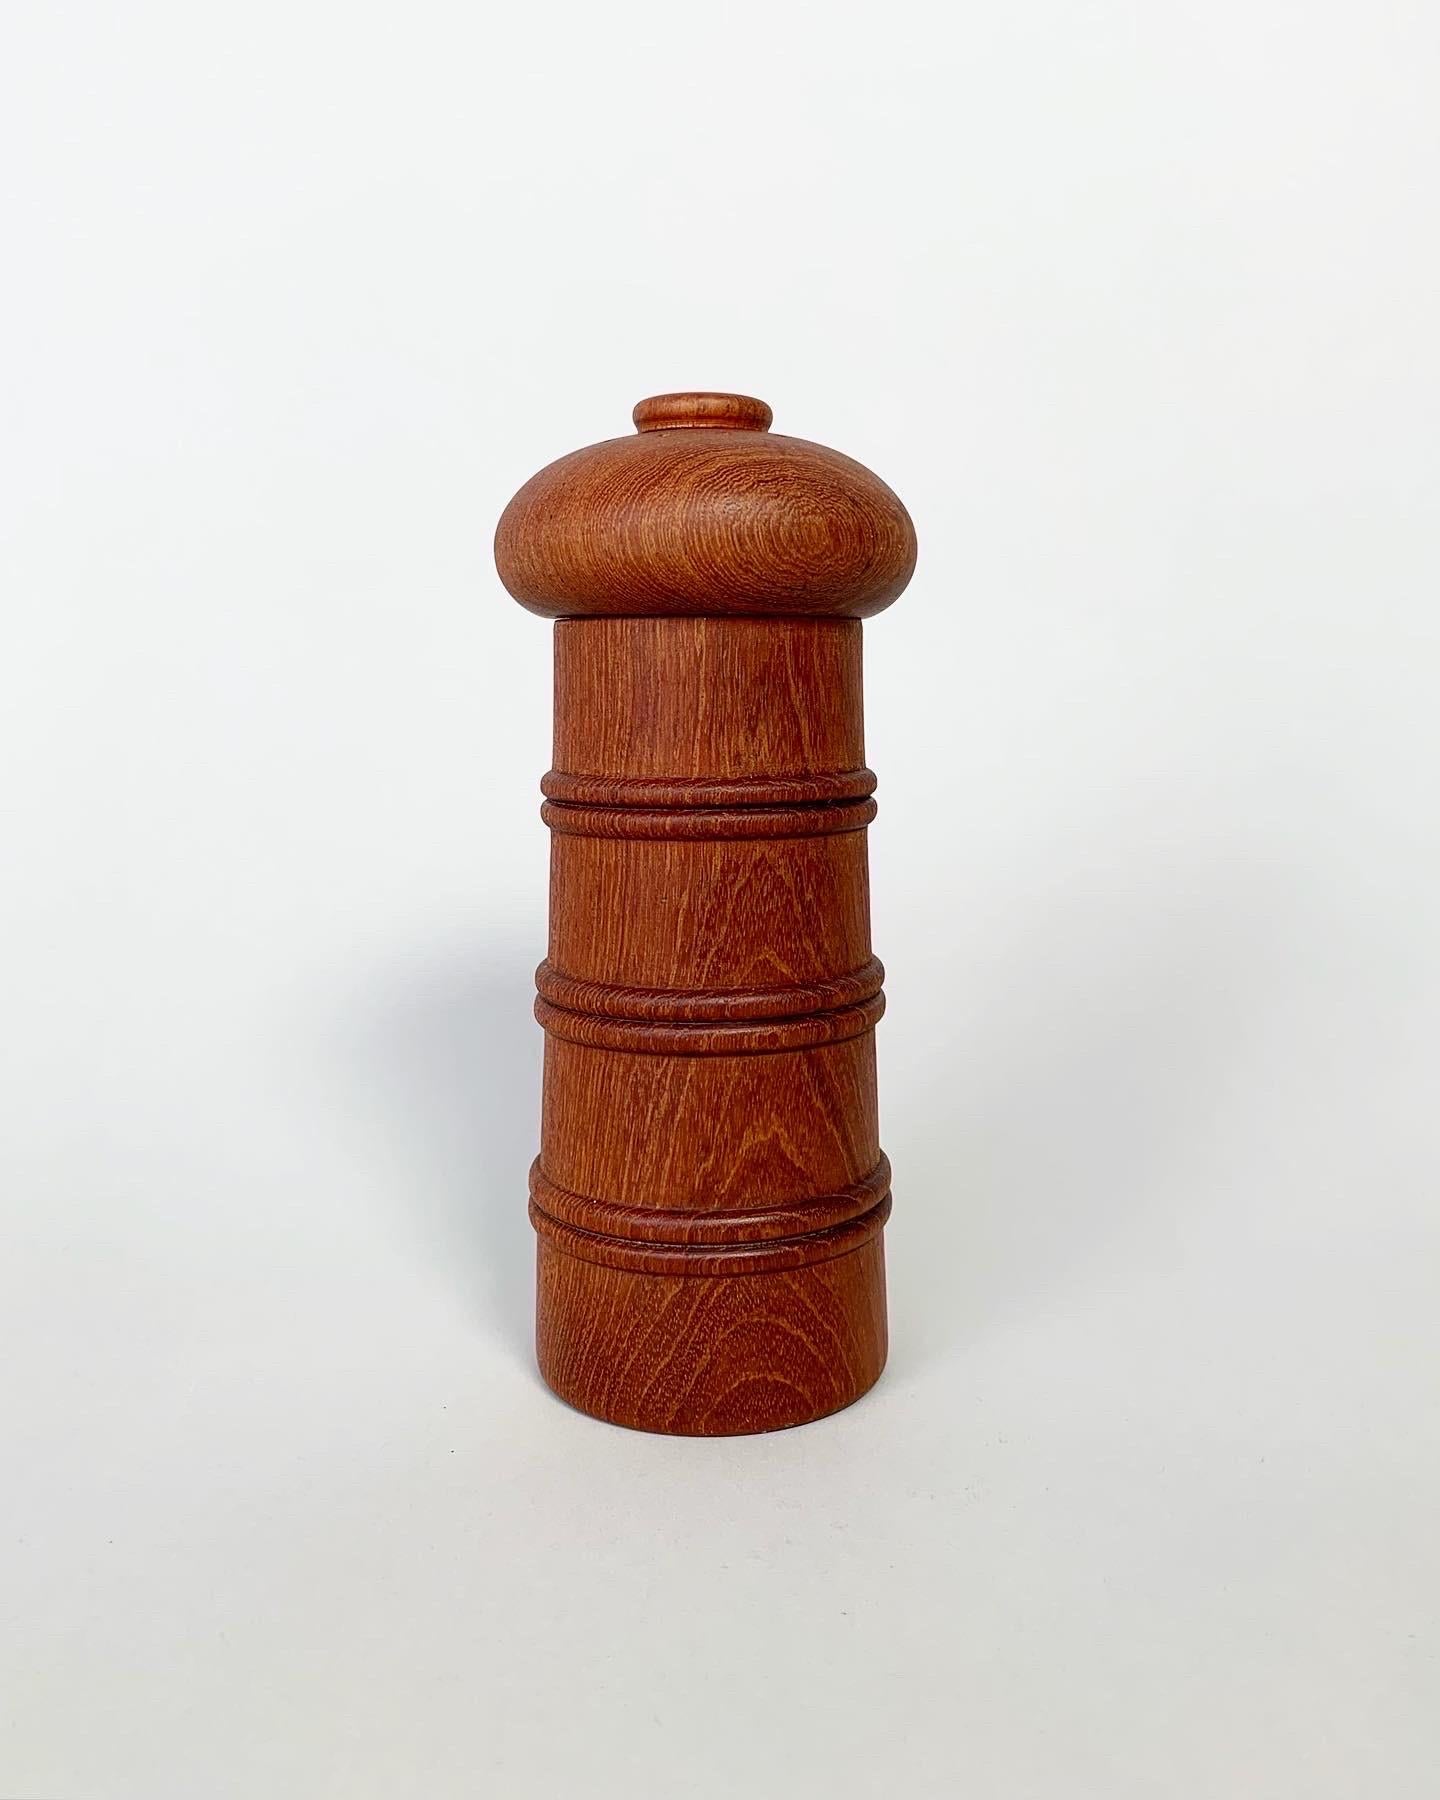 Jens Harald Quistgaard teak pepper grinder with integrated salt shaker, designed in 1972 for Dansk Designs, Denmark.

The salt can be filled in on top, the pepper on the bottom.
The stainless steel mill was made by Peugeot.

Height: 18